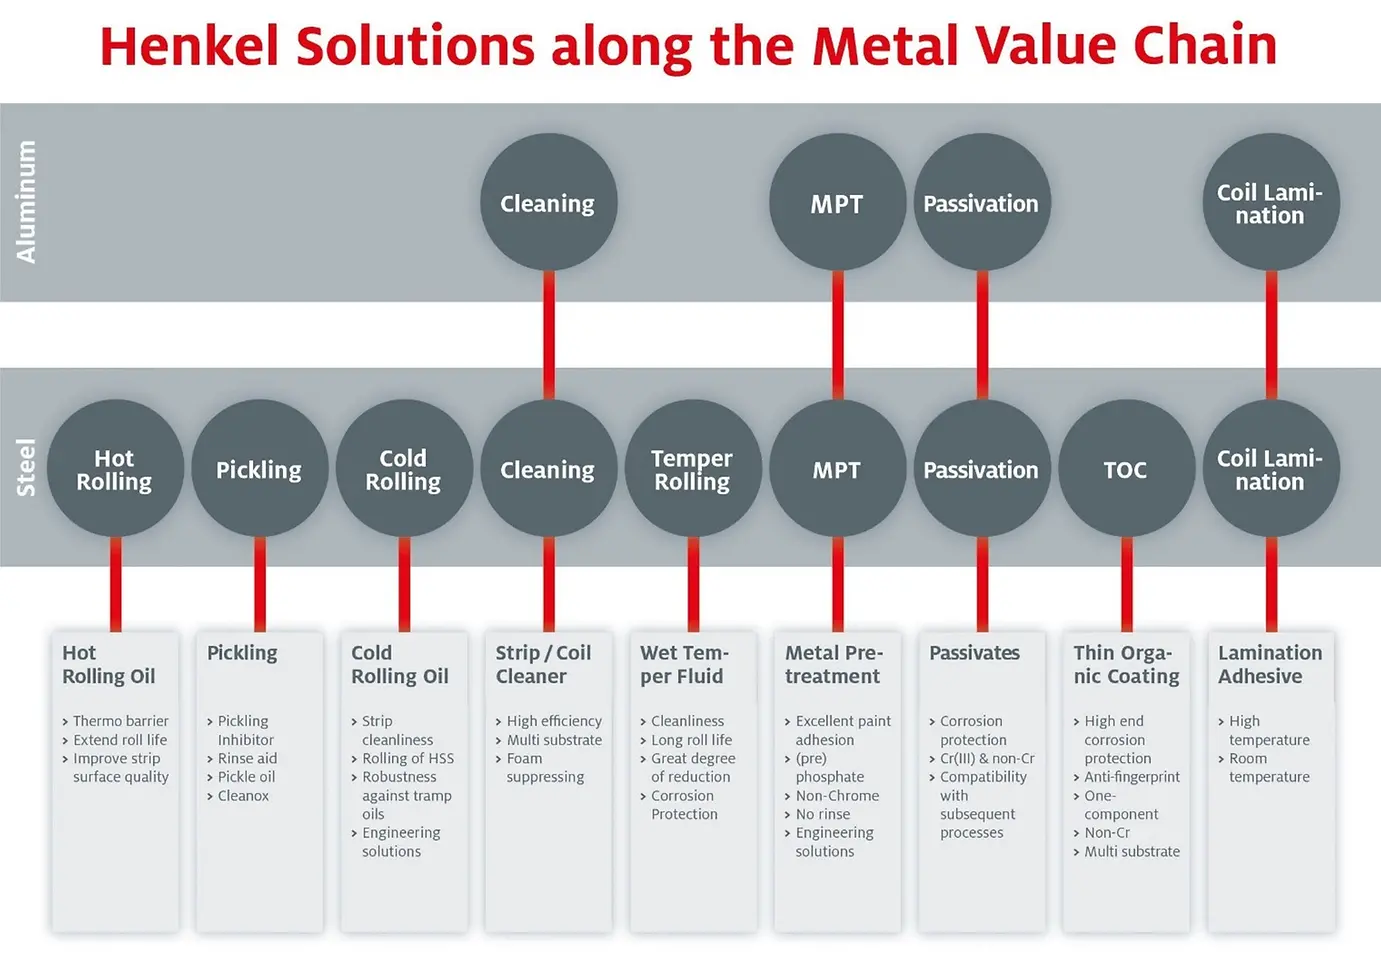 Henkel solutions along the metal value chain